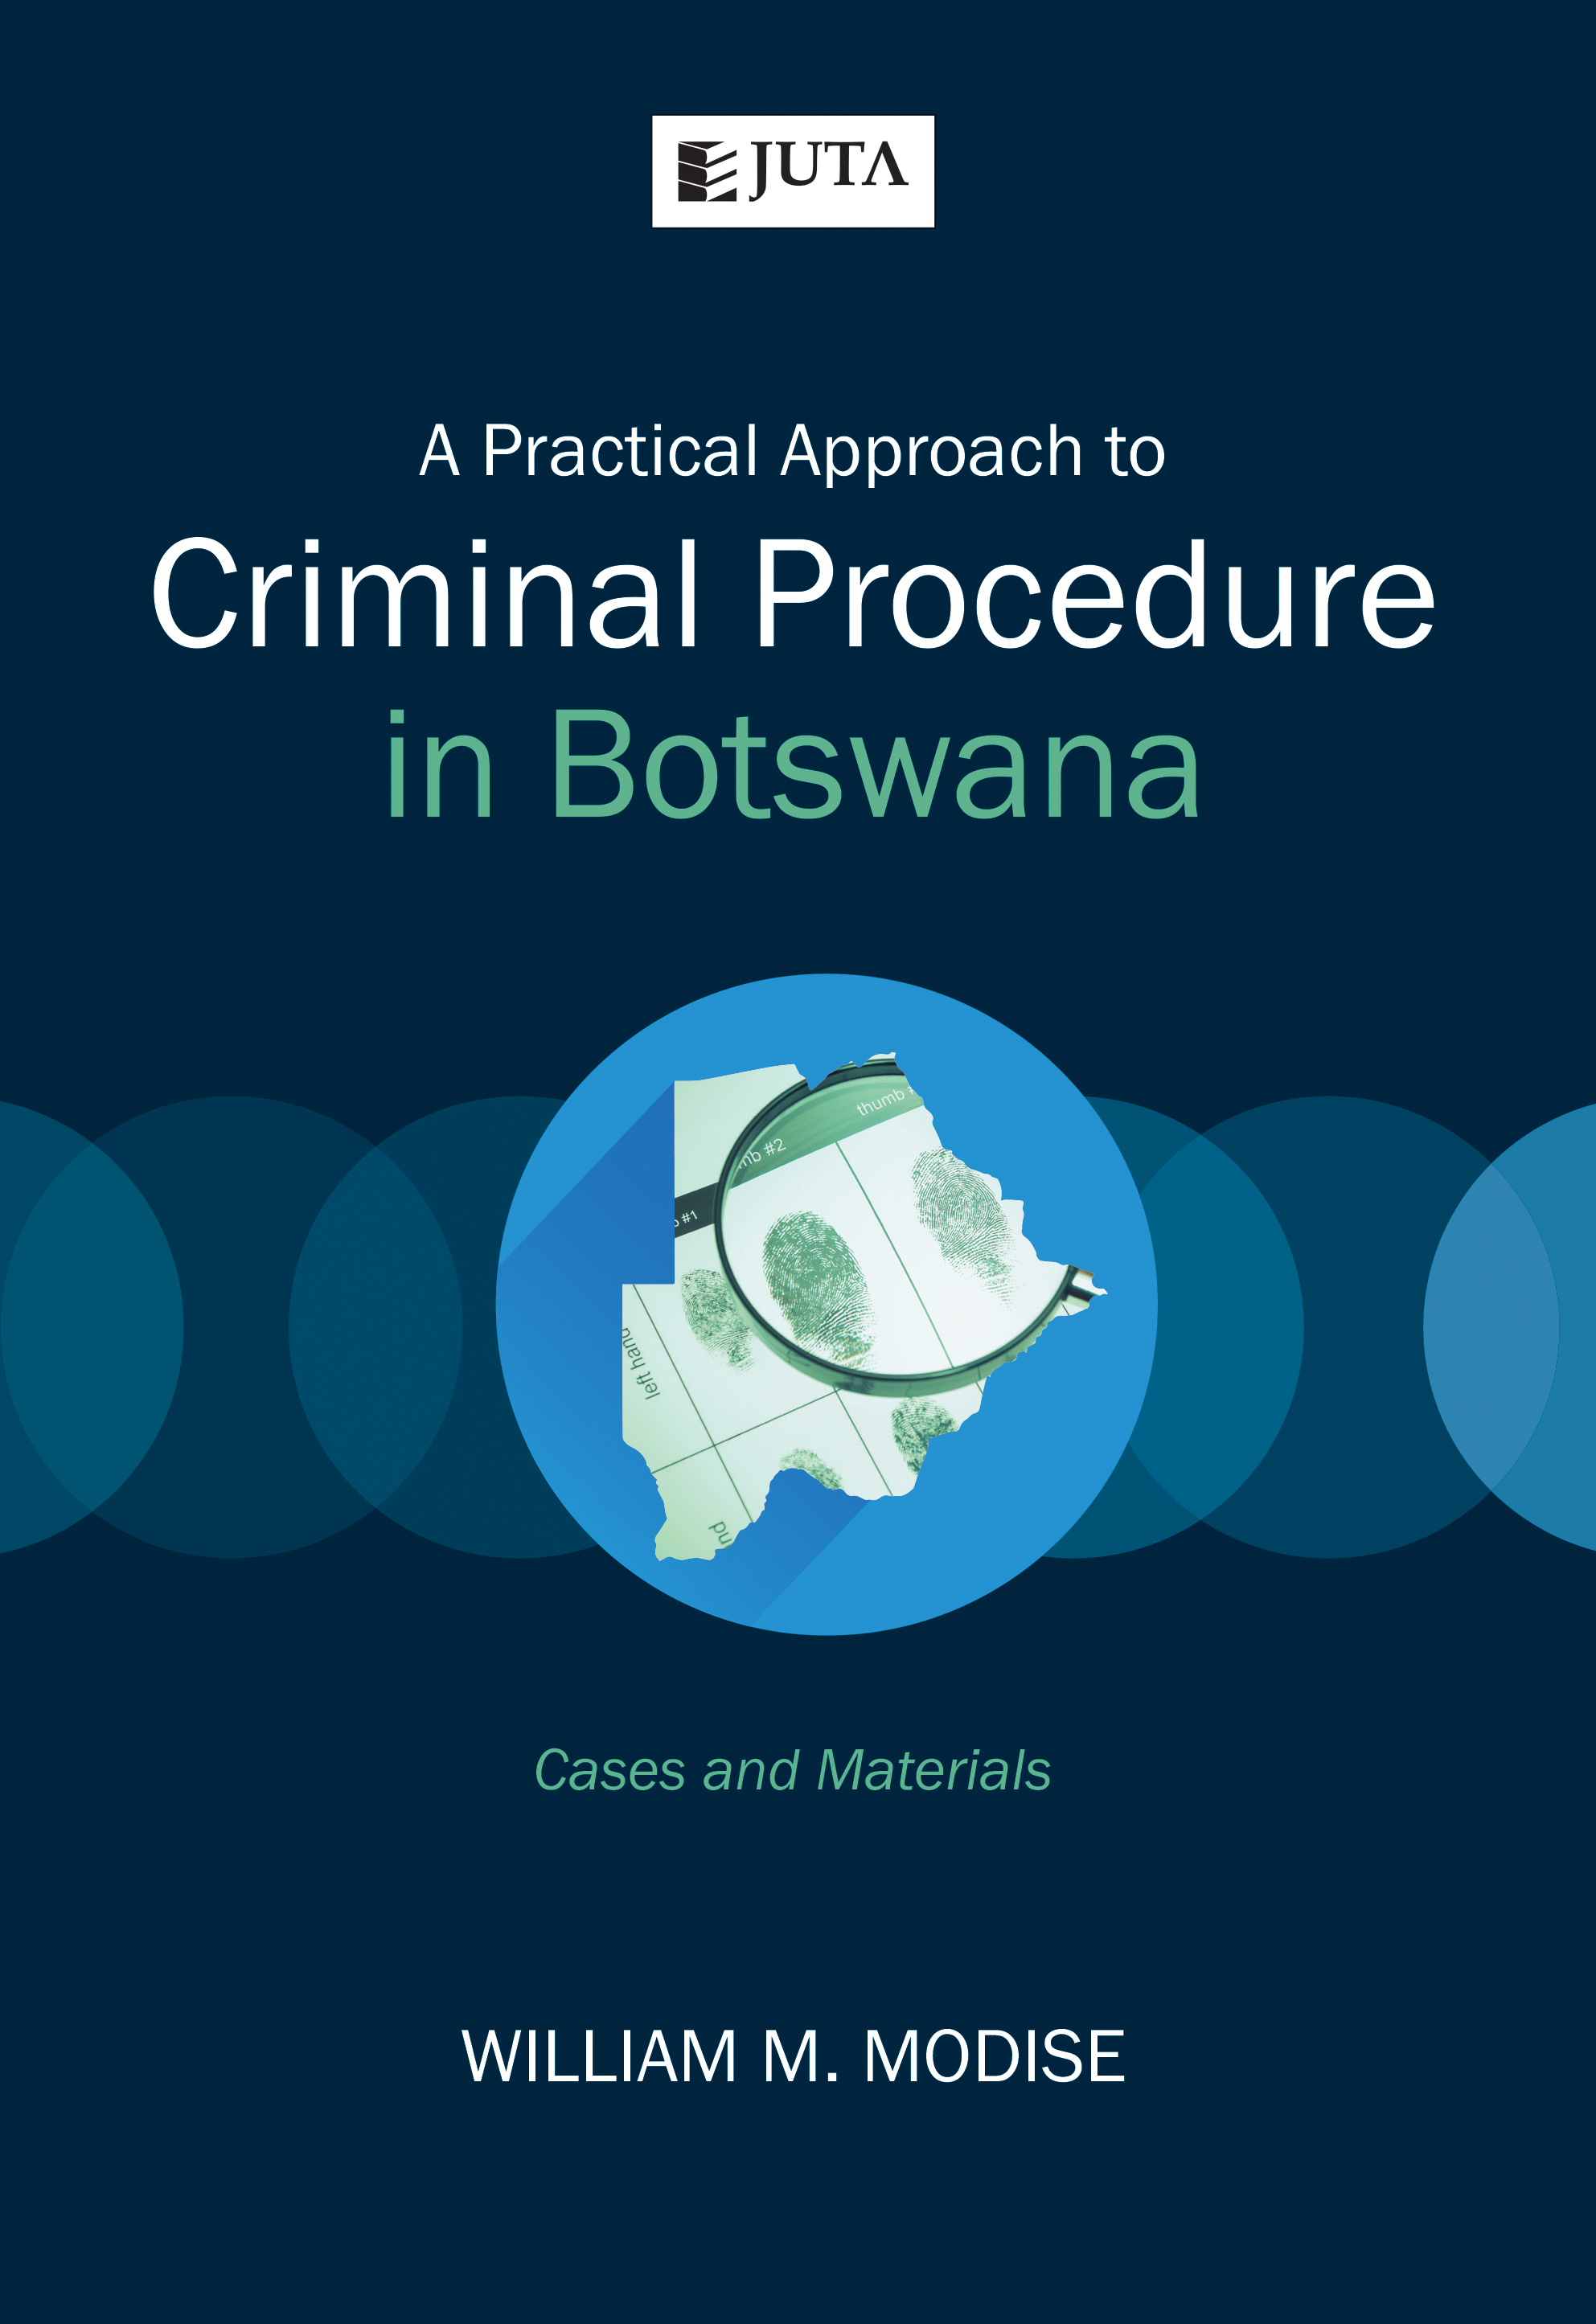 Practical Approach to Criminal Procedure in Botswana, A